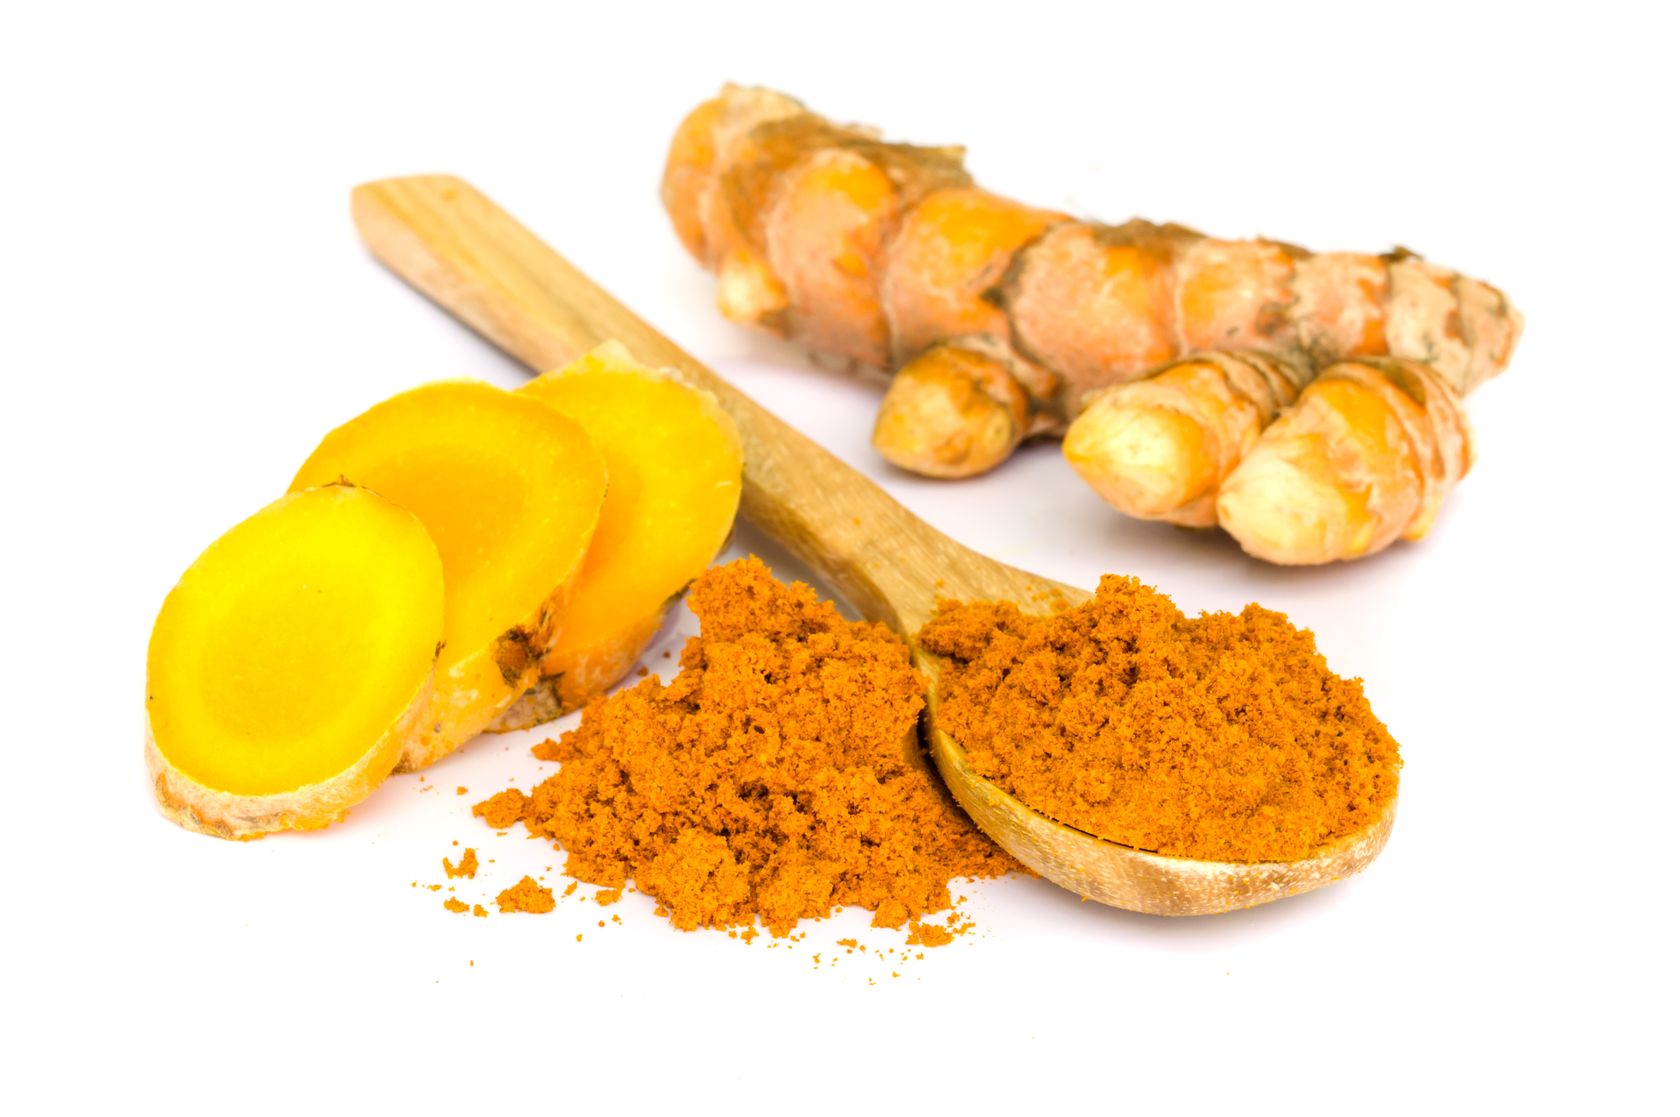 tumeric is a spice that supports your body's immune system